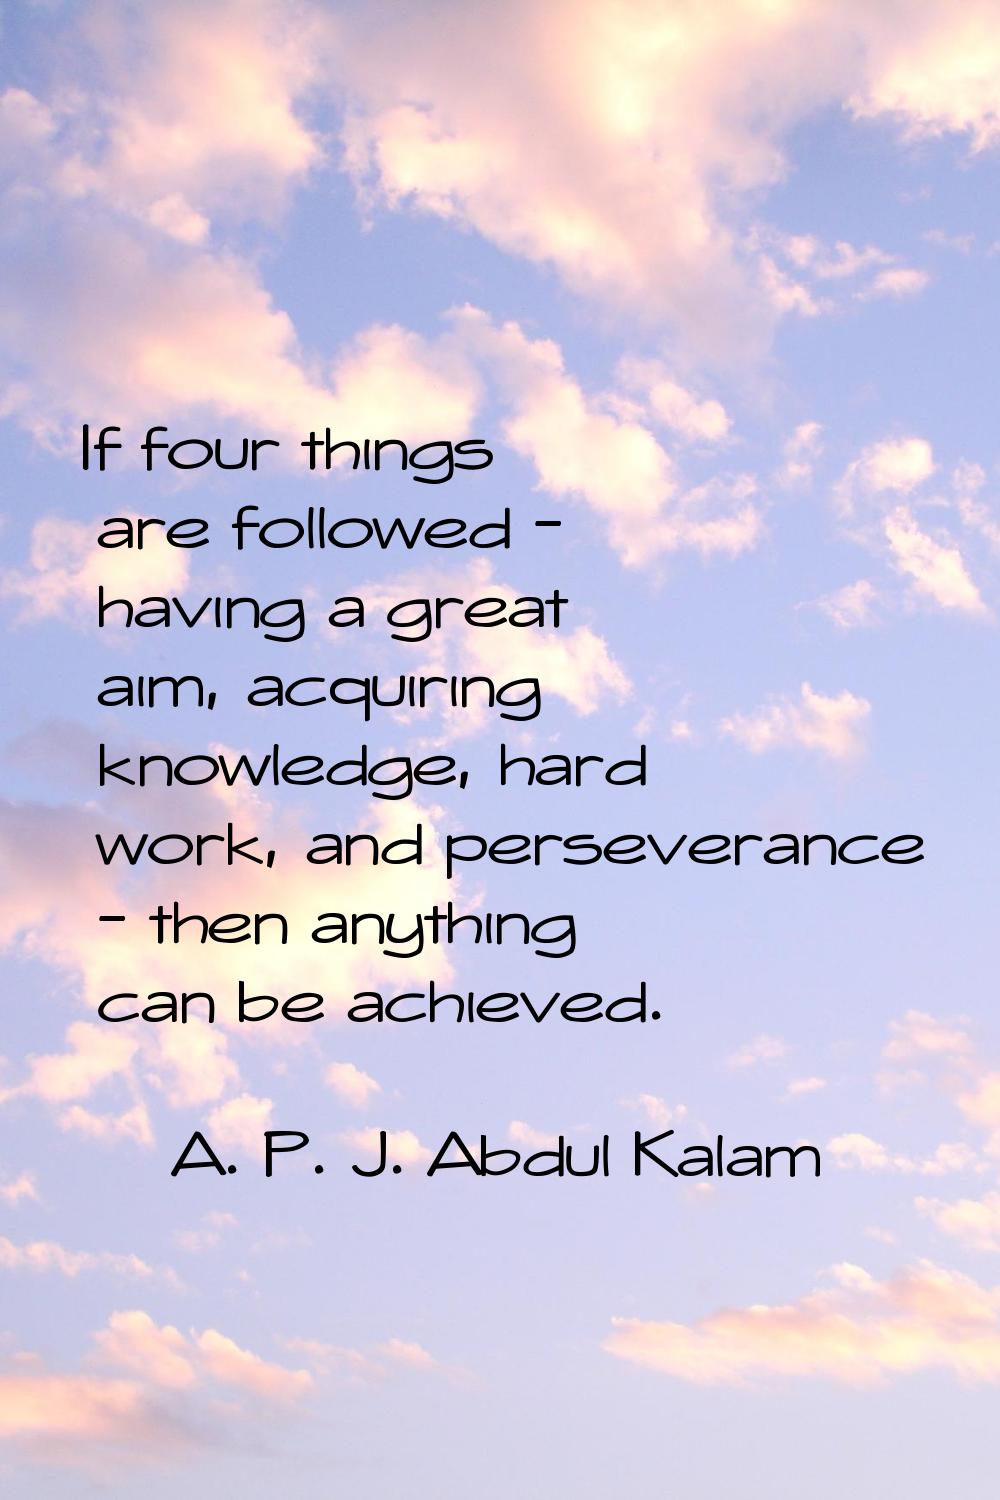 If four things are followed - having a great aim, acquiring knowledge, hard work, and perseverance 